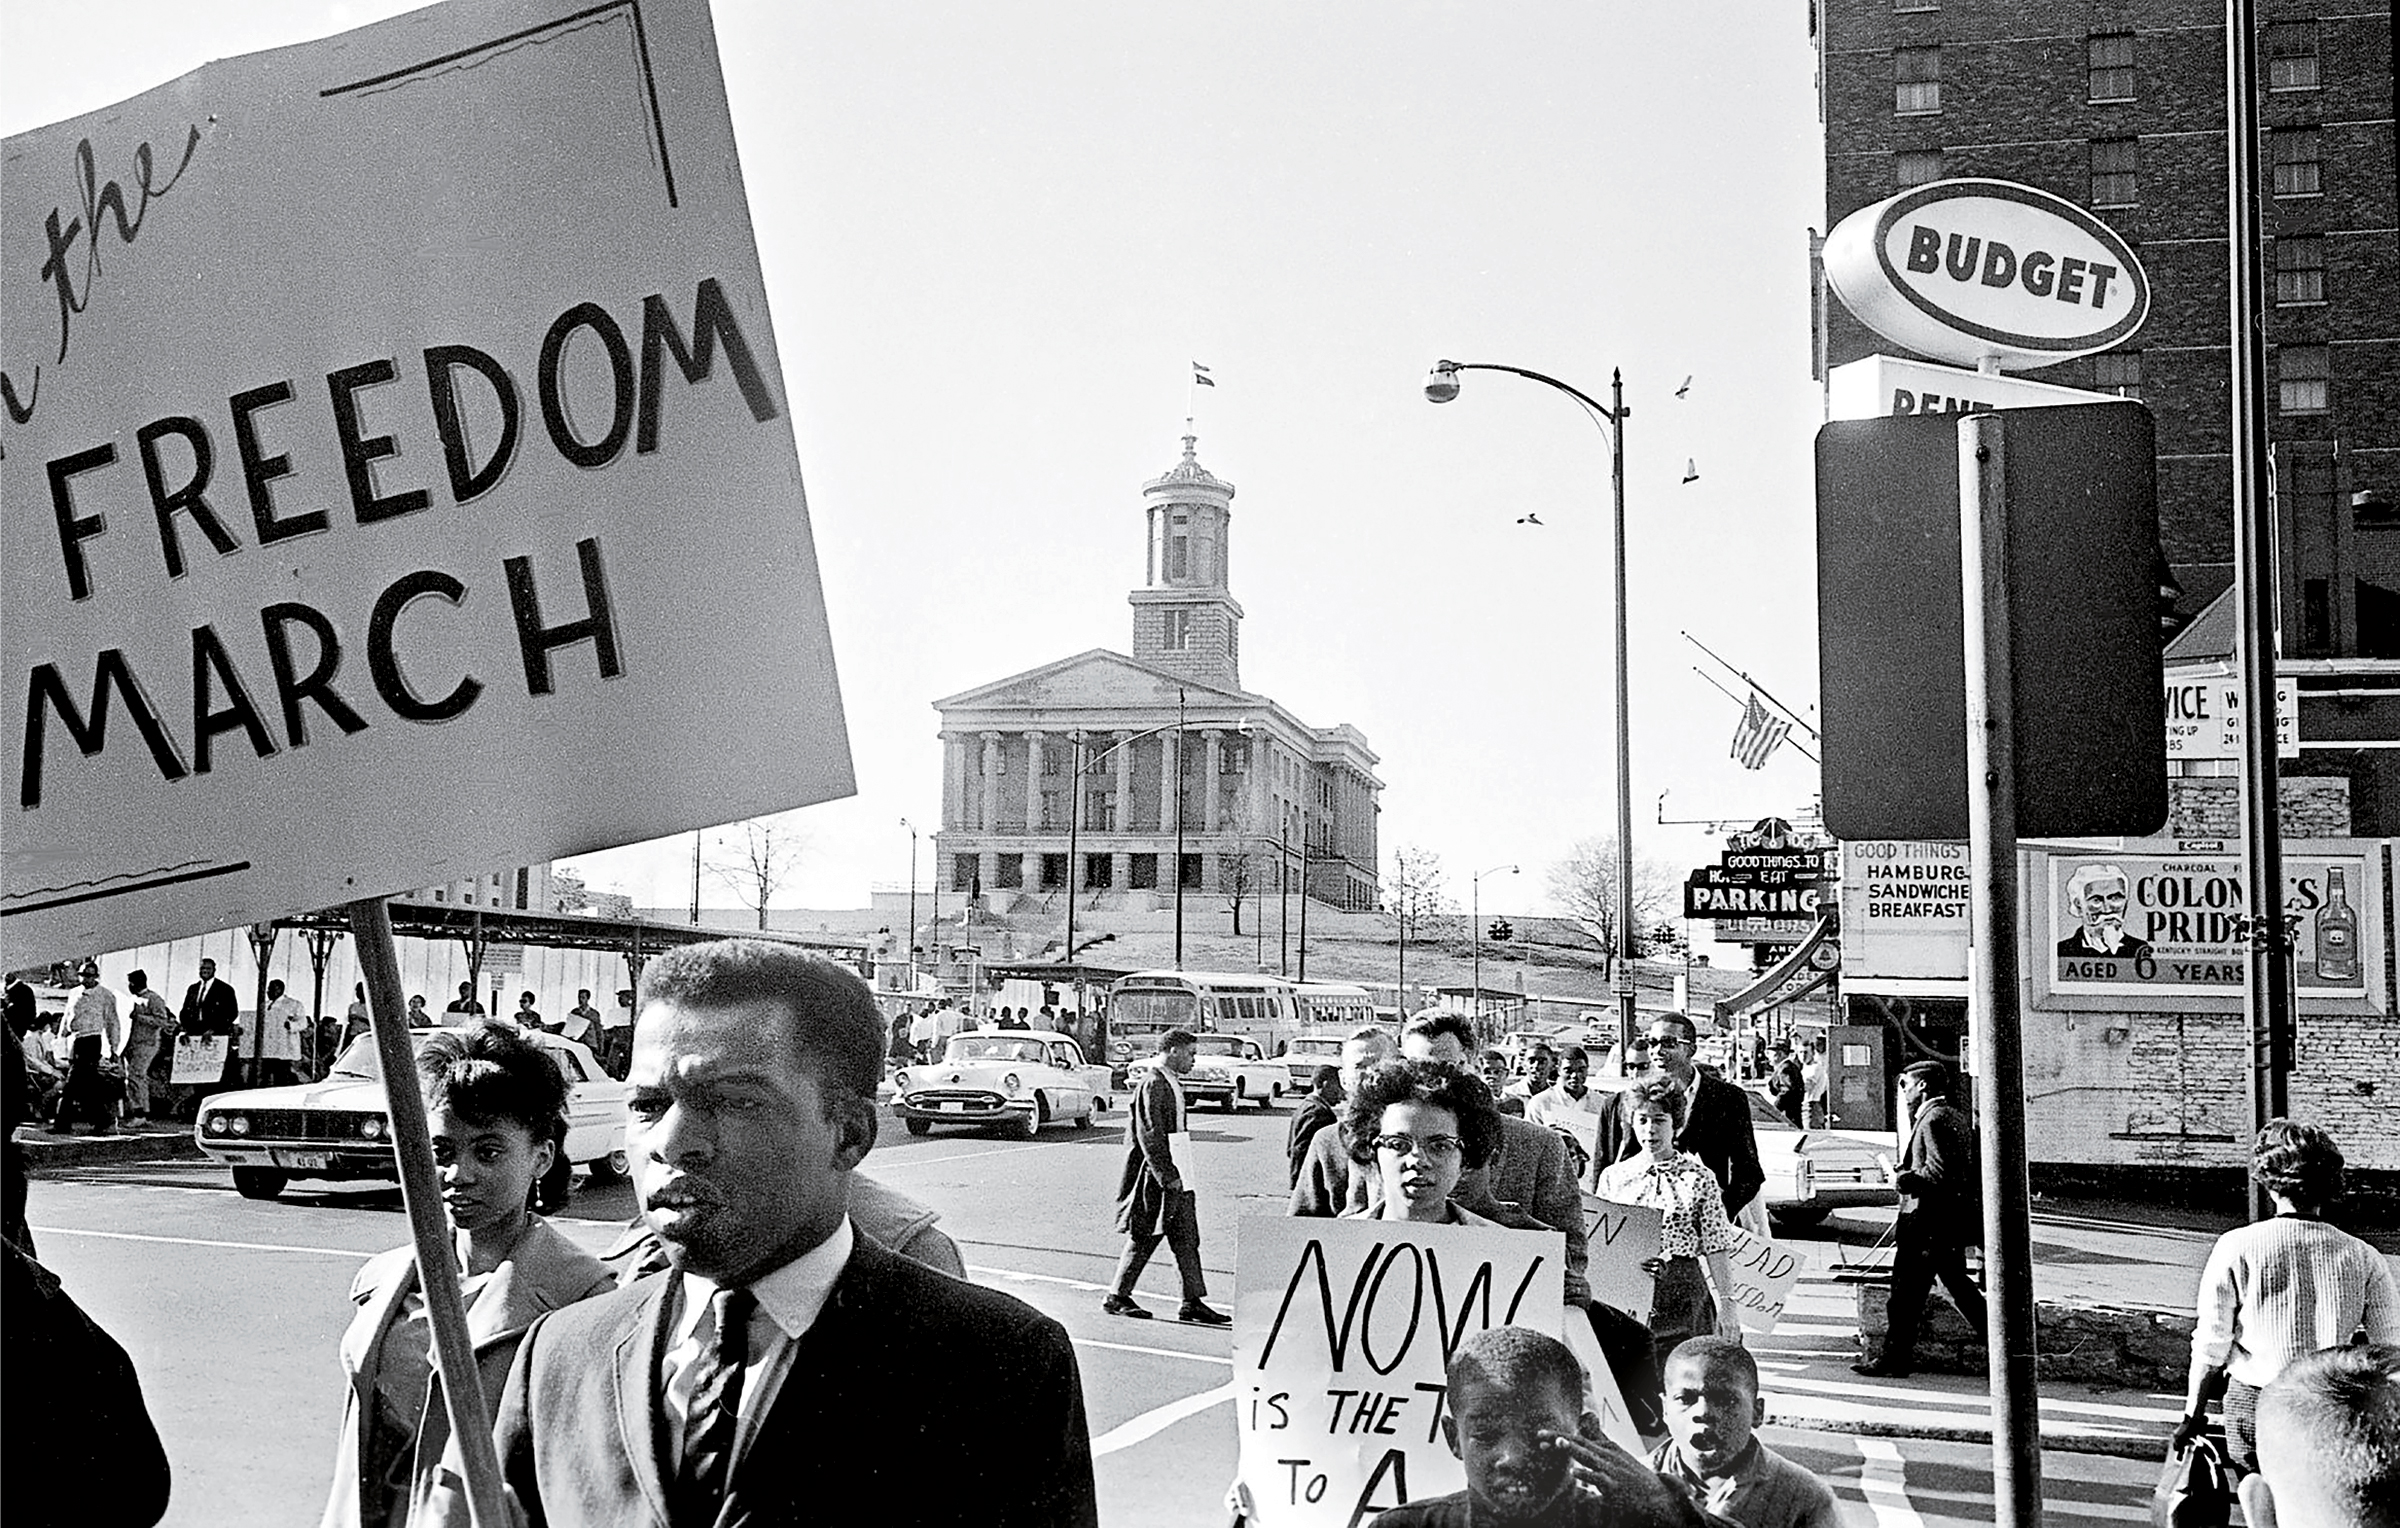 John Lewis, in the foreground holding a sign, demonstrates in downtown Nashville on March 23, 1963.